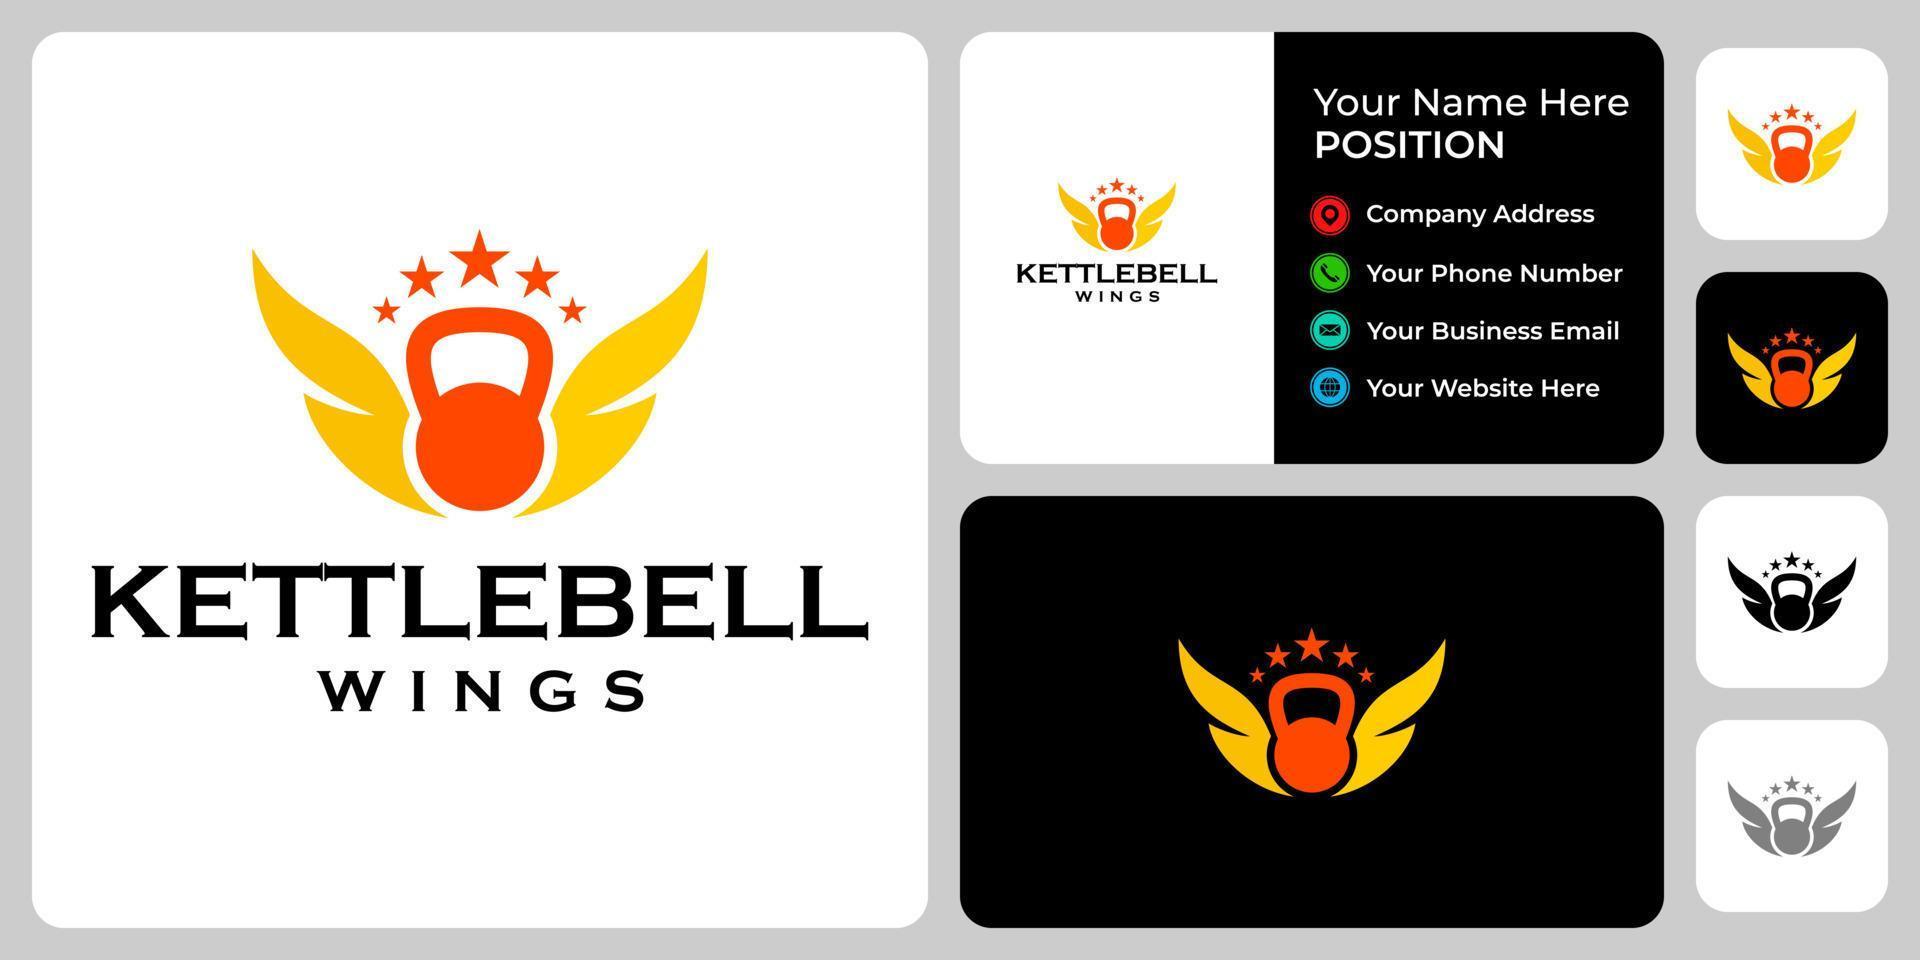 Kettlebell and crown king logo design with business card template. vector